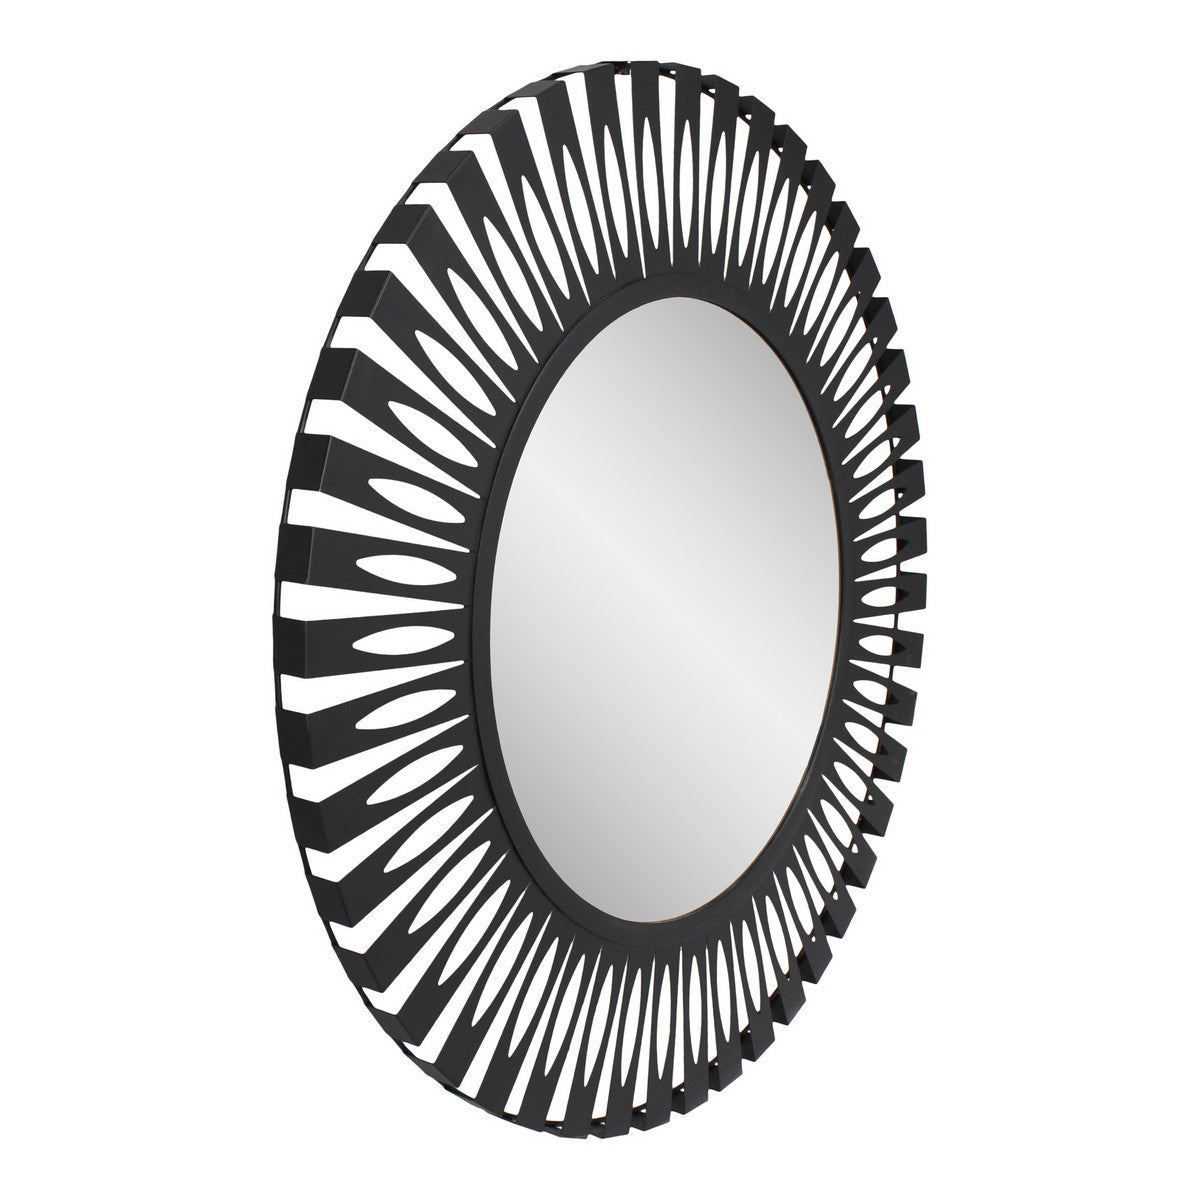 Moe's Home Collection Radiate Mirror Black - TY-1038-02